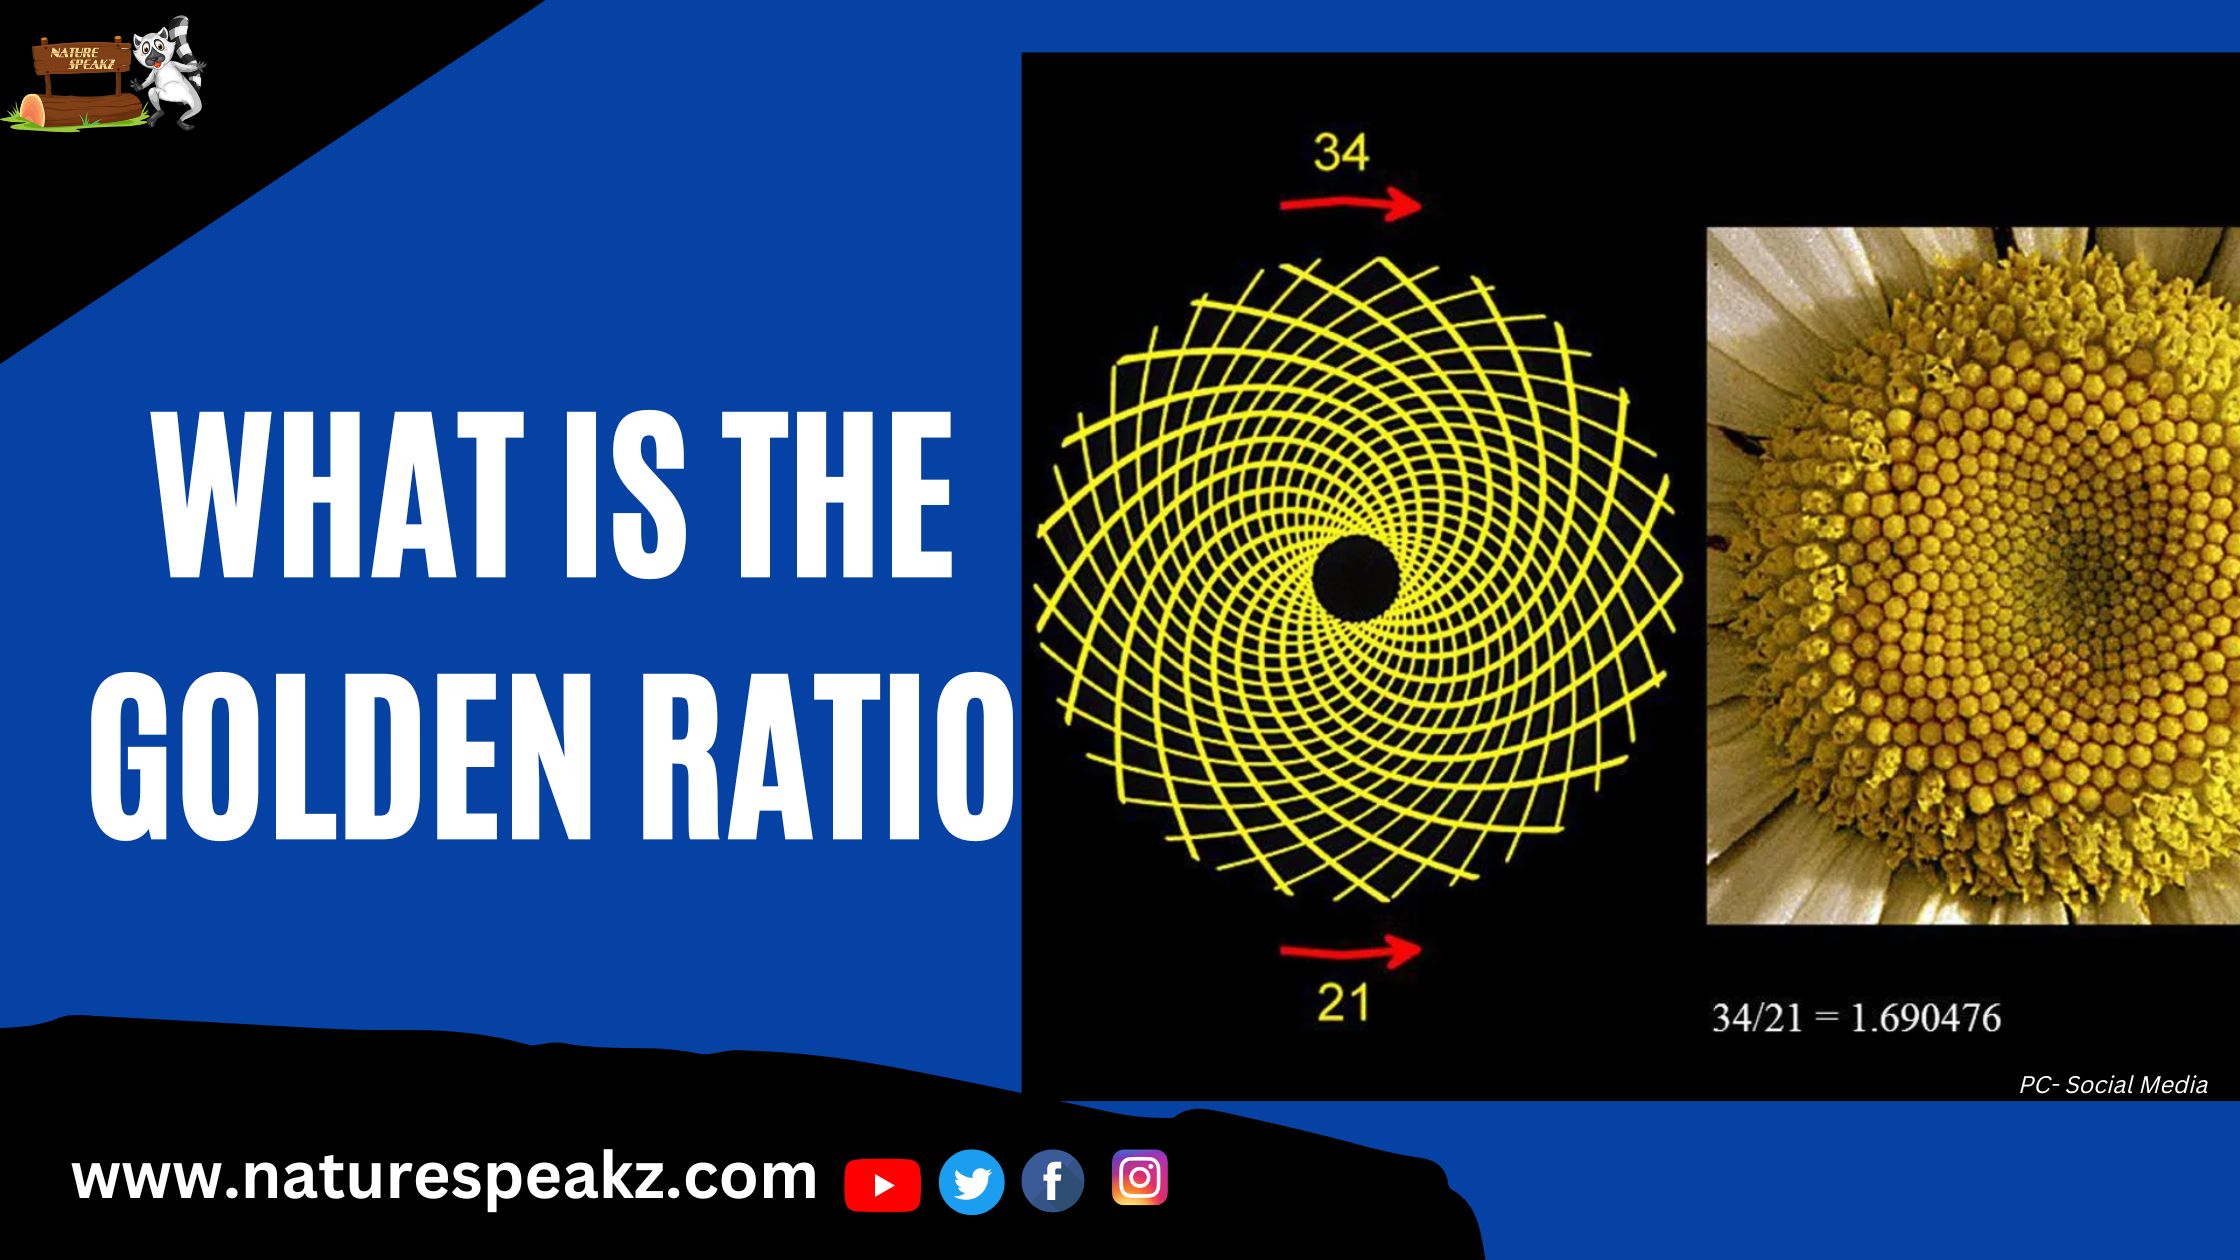 The Golden Ratio in Nature